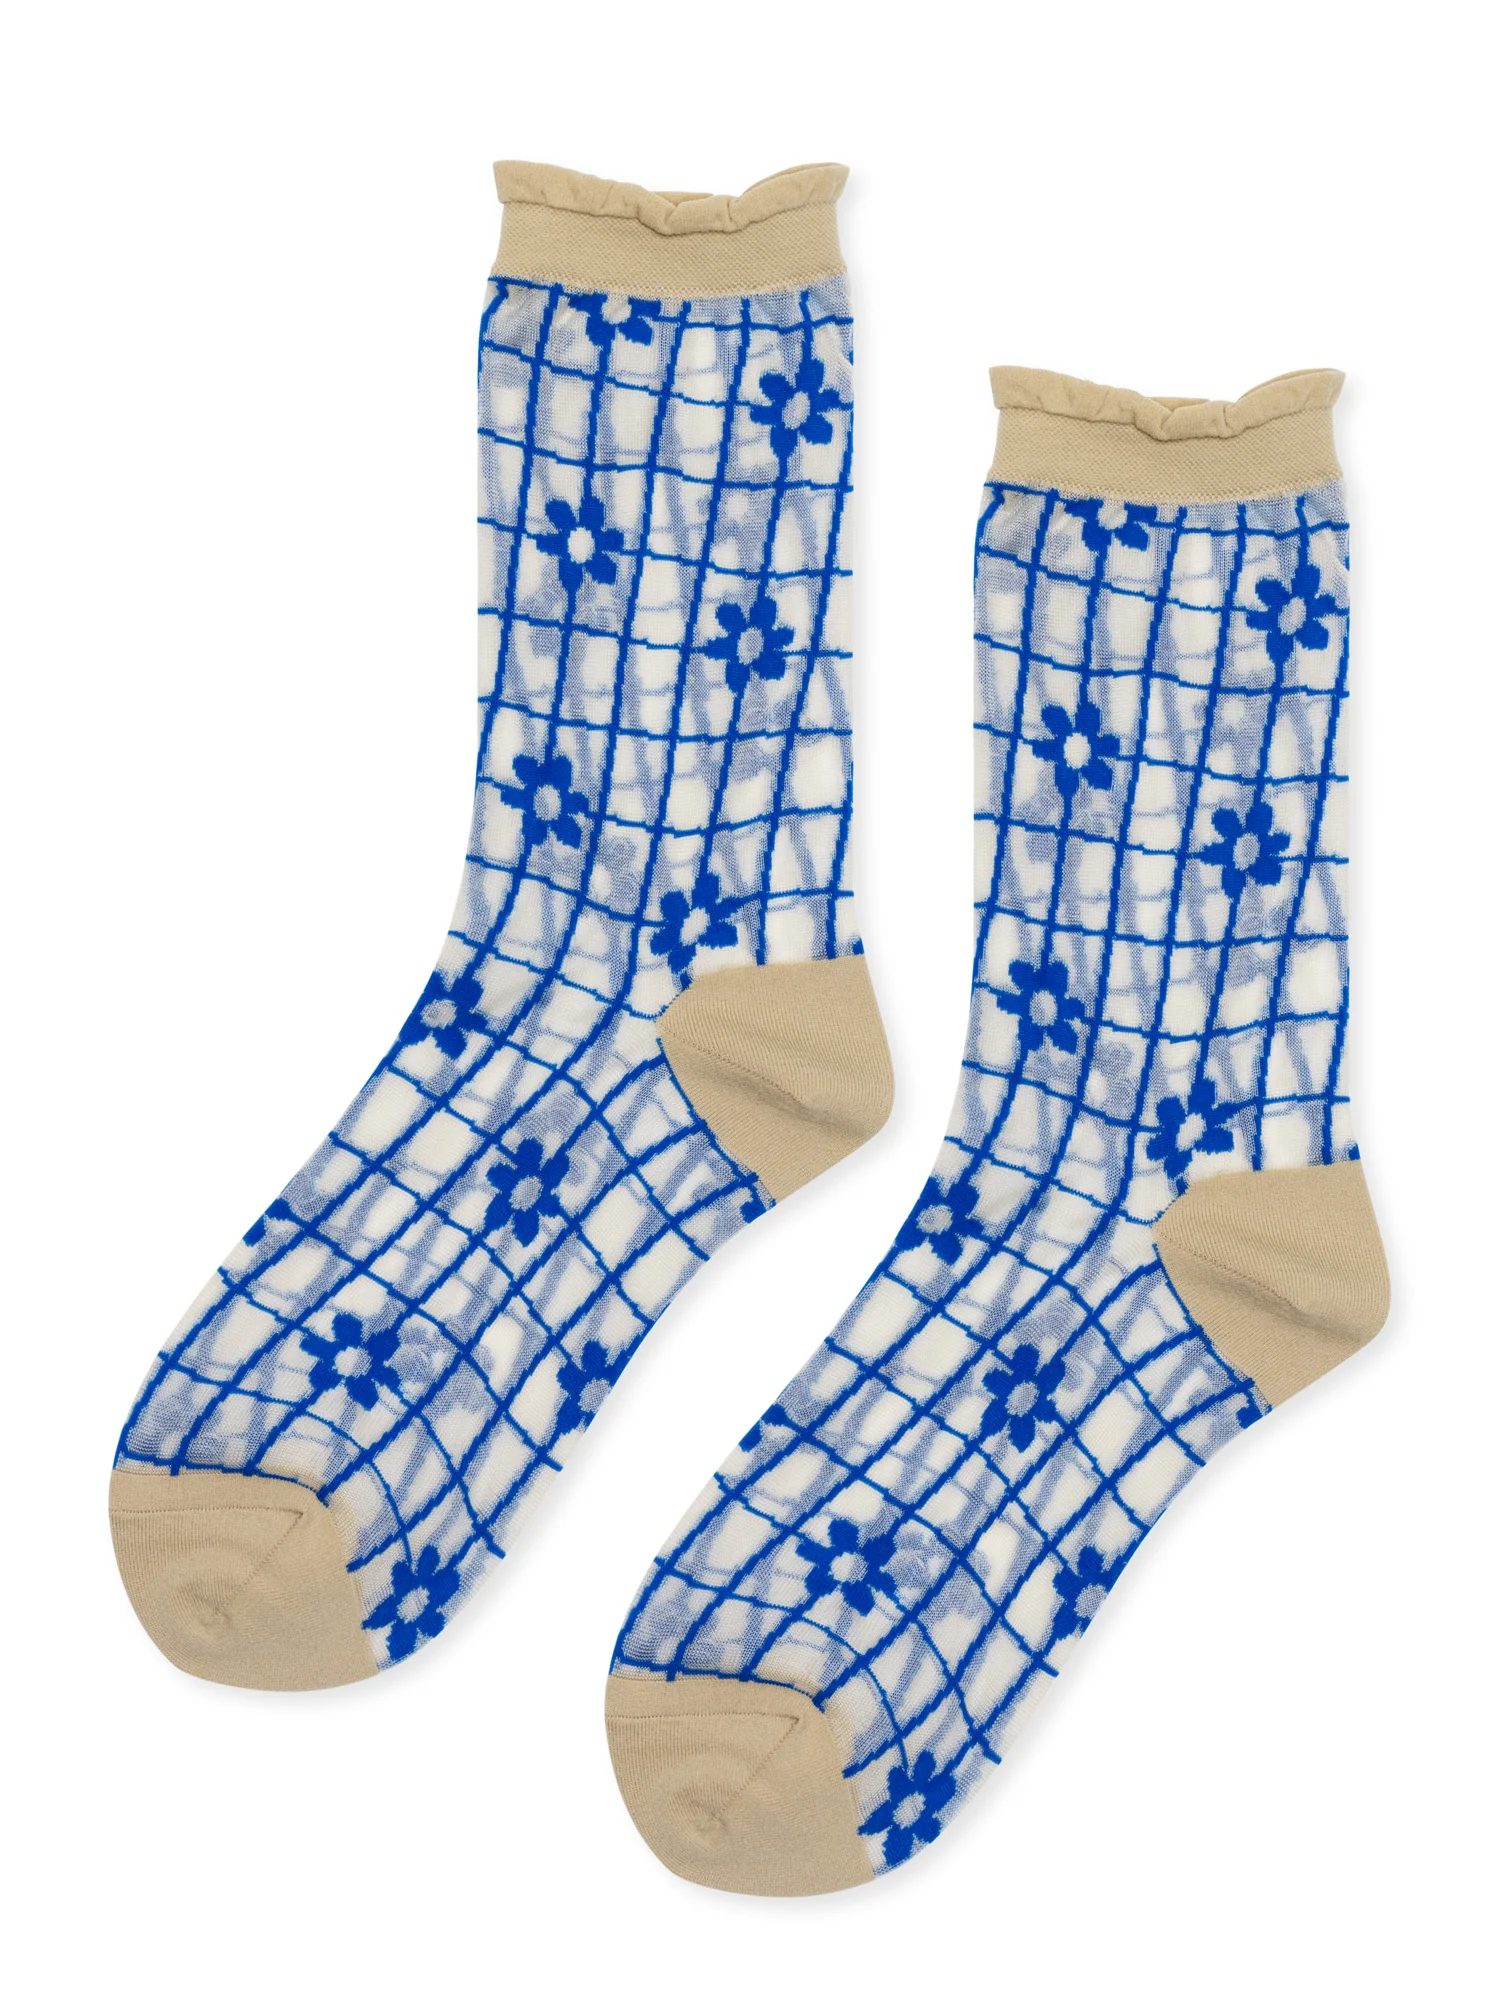 sheer socks with a grid-like pattern. small flowers are part of the blue pattern. Rolled top detail, aid in front of a white background. 